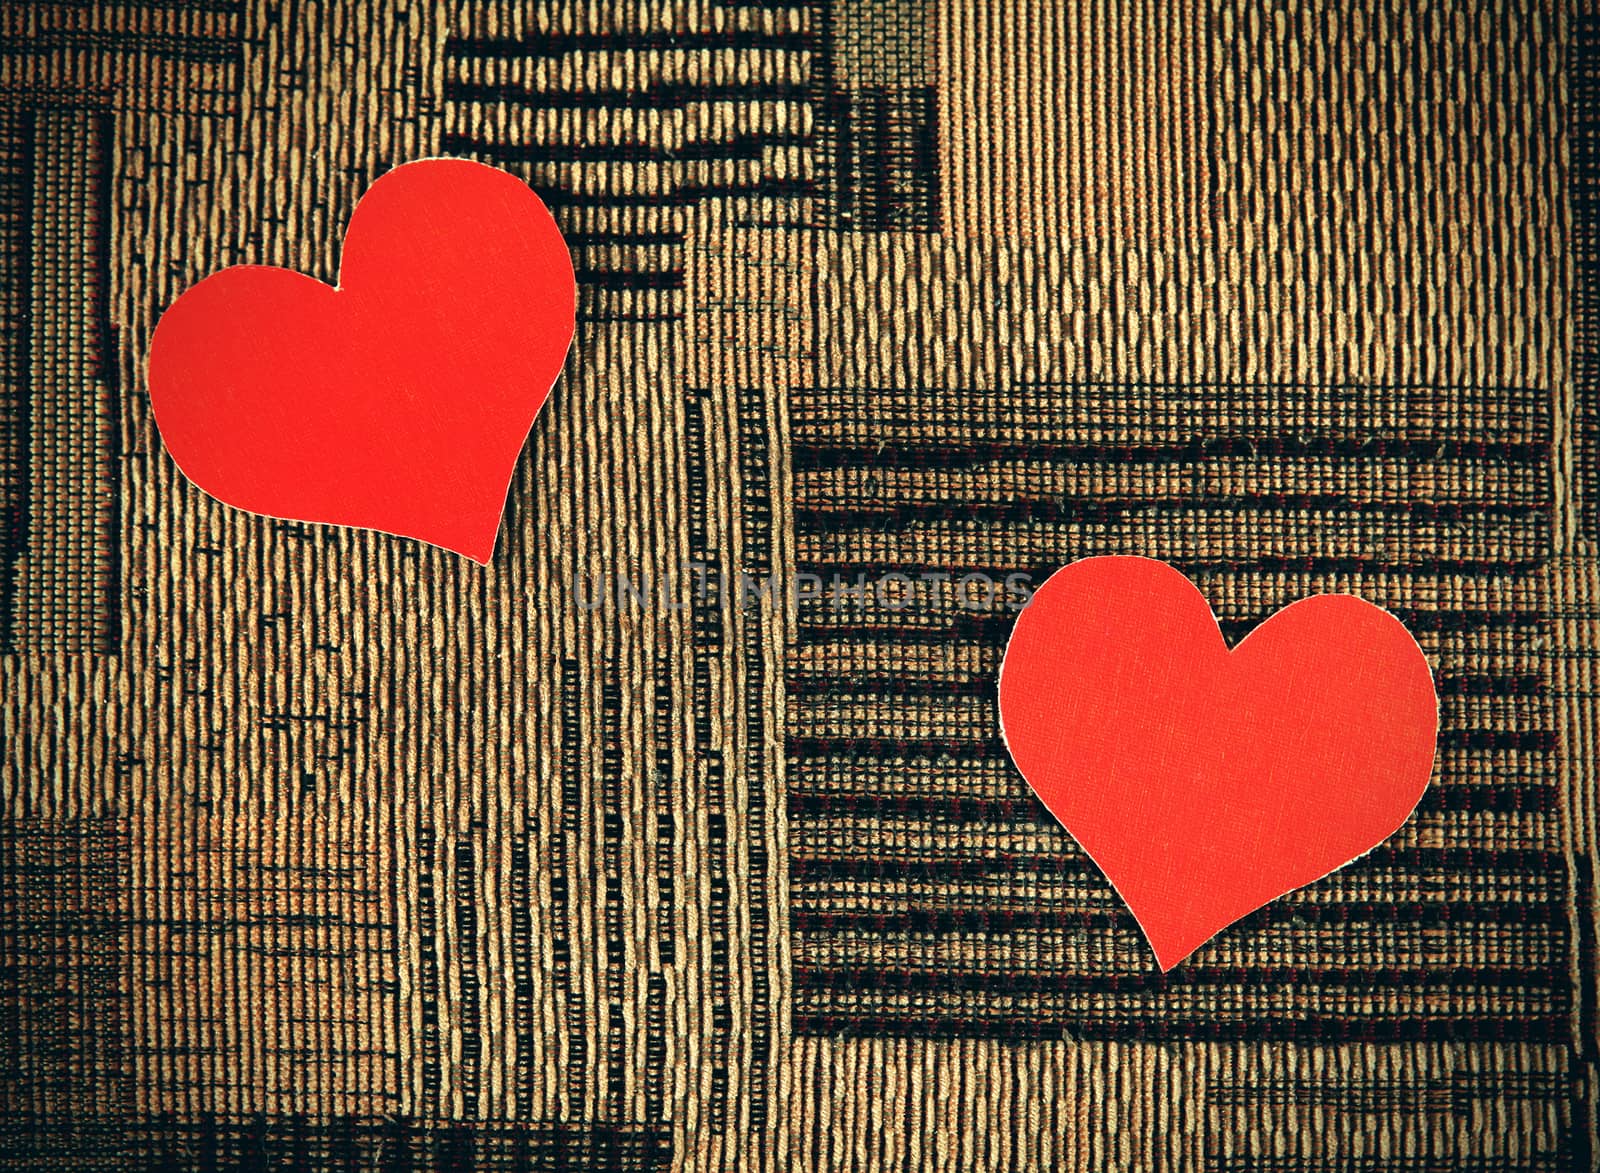 Heart Shapes on the Fabric Background by sabphoto